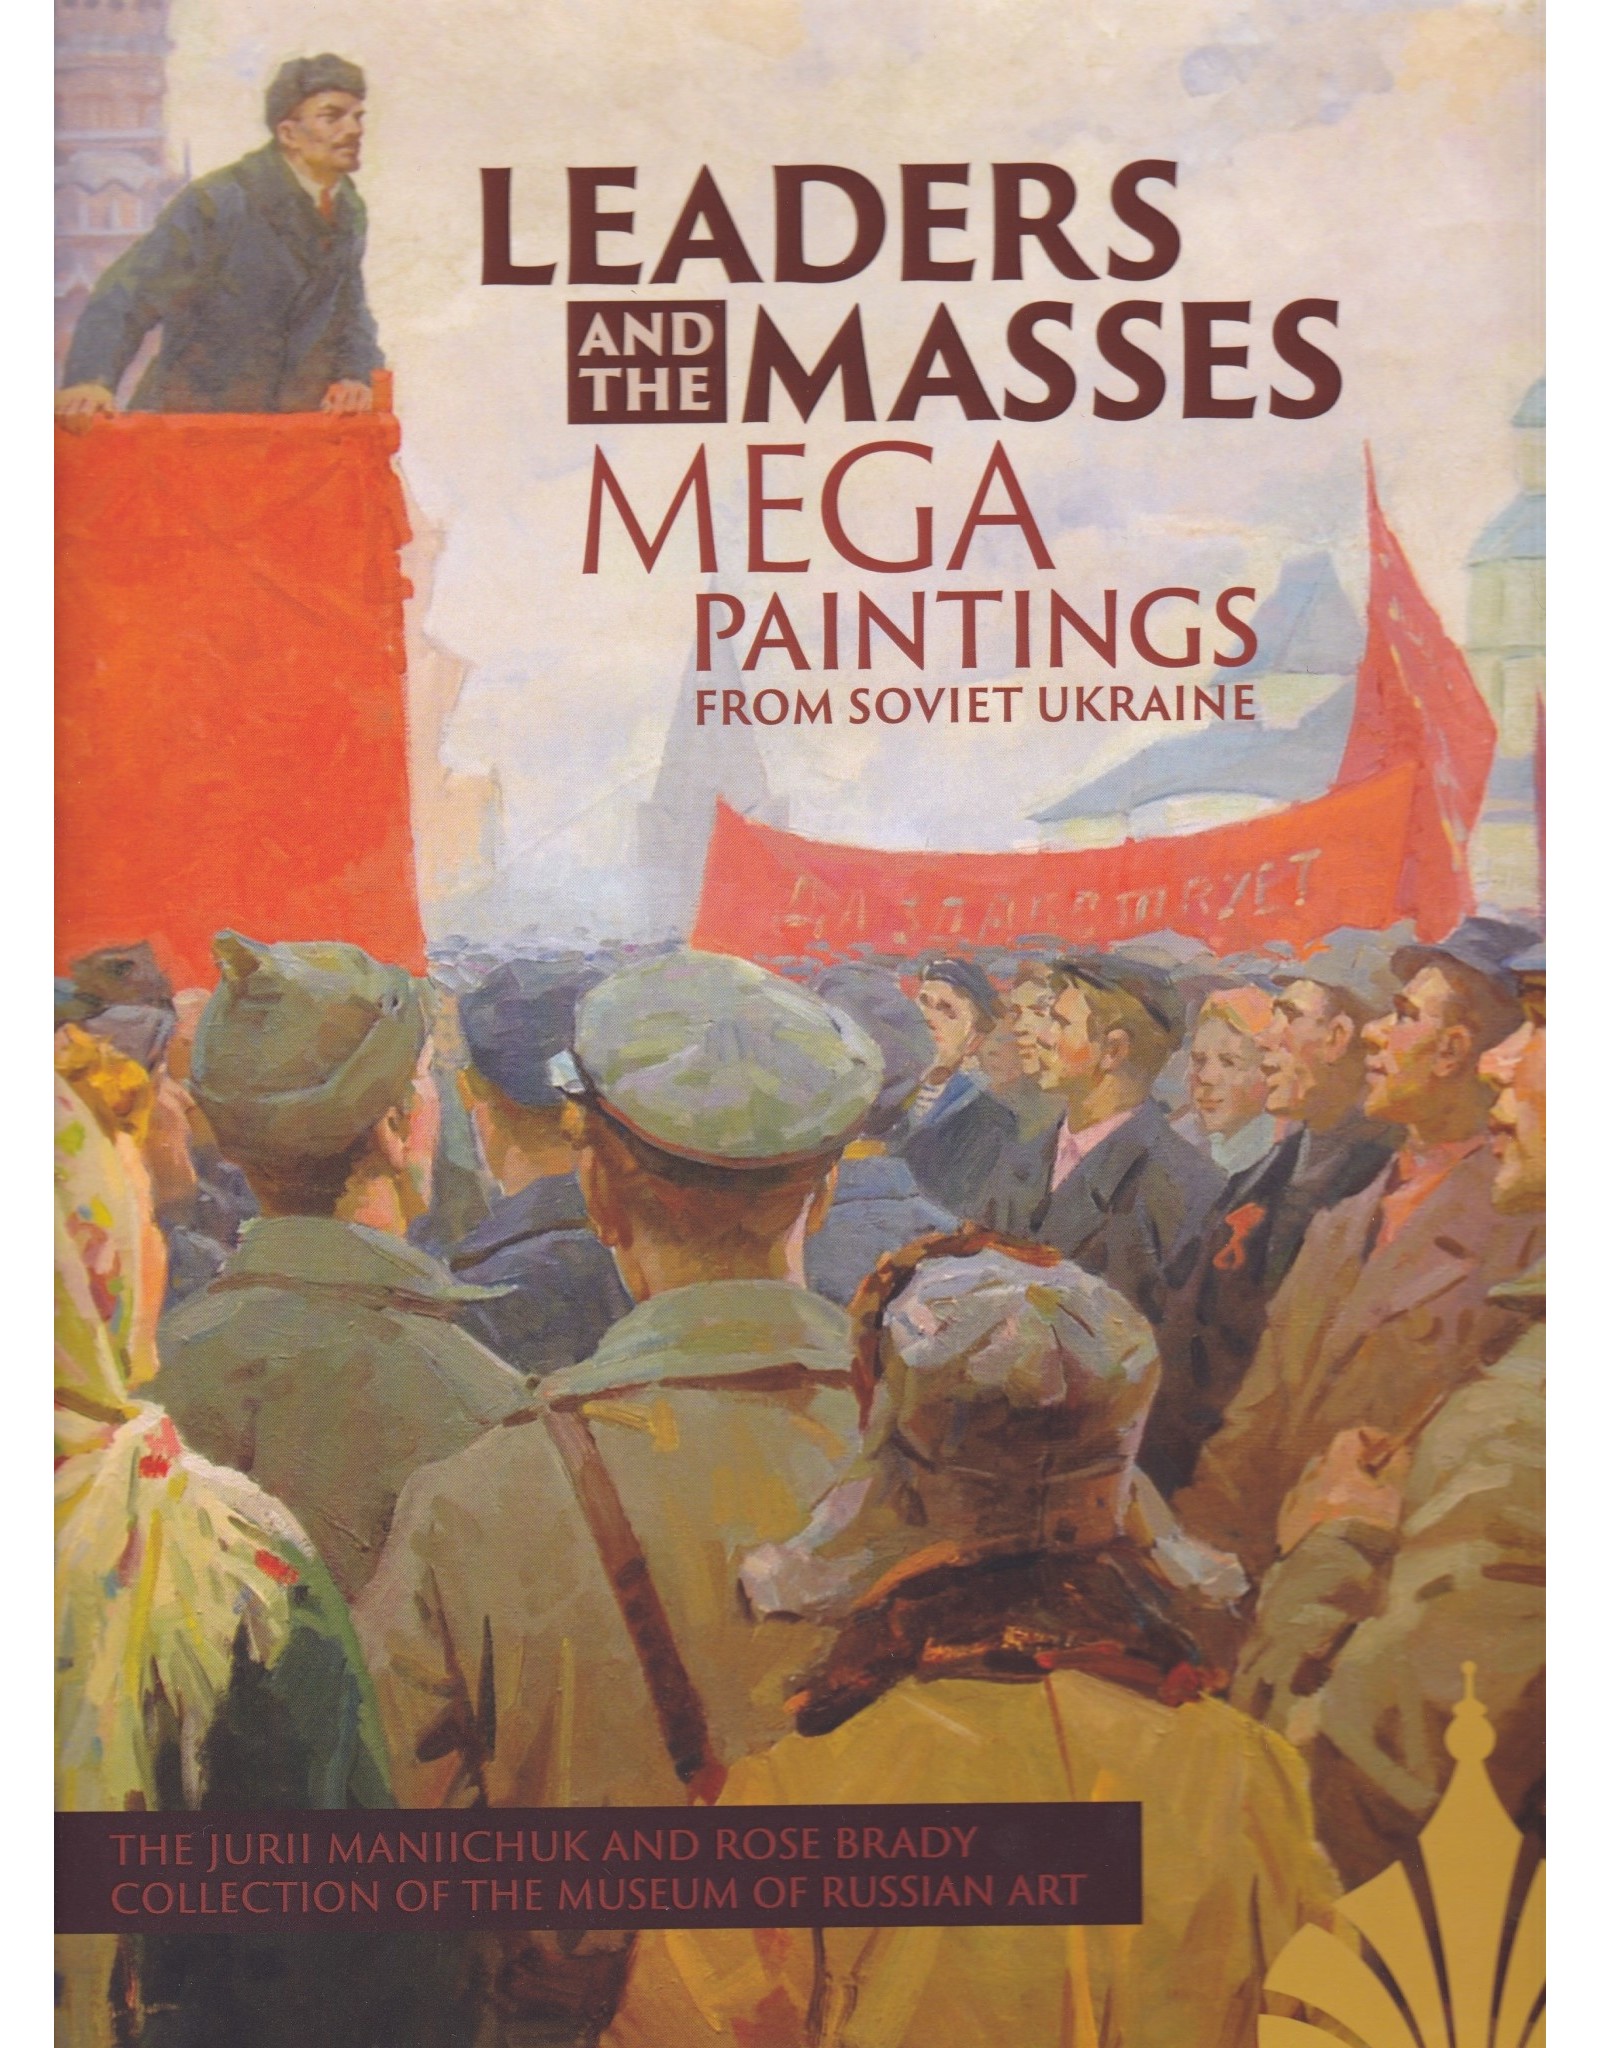 "Leaders and the Masses" Exhibit Catalog